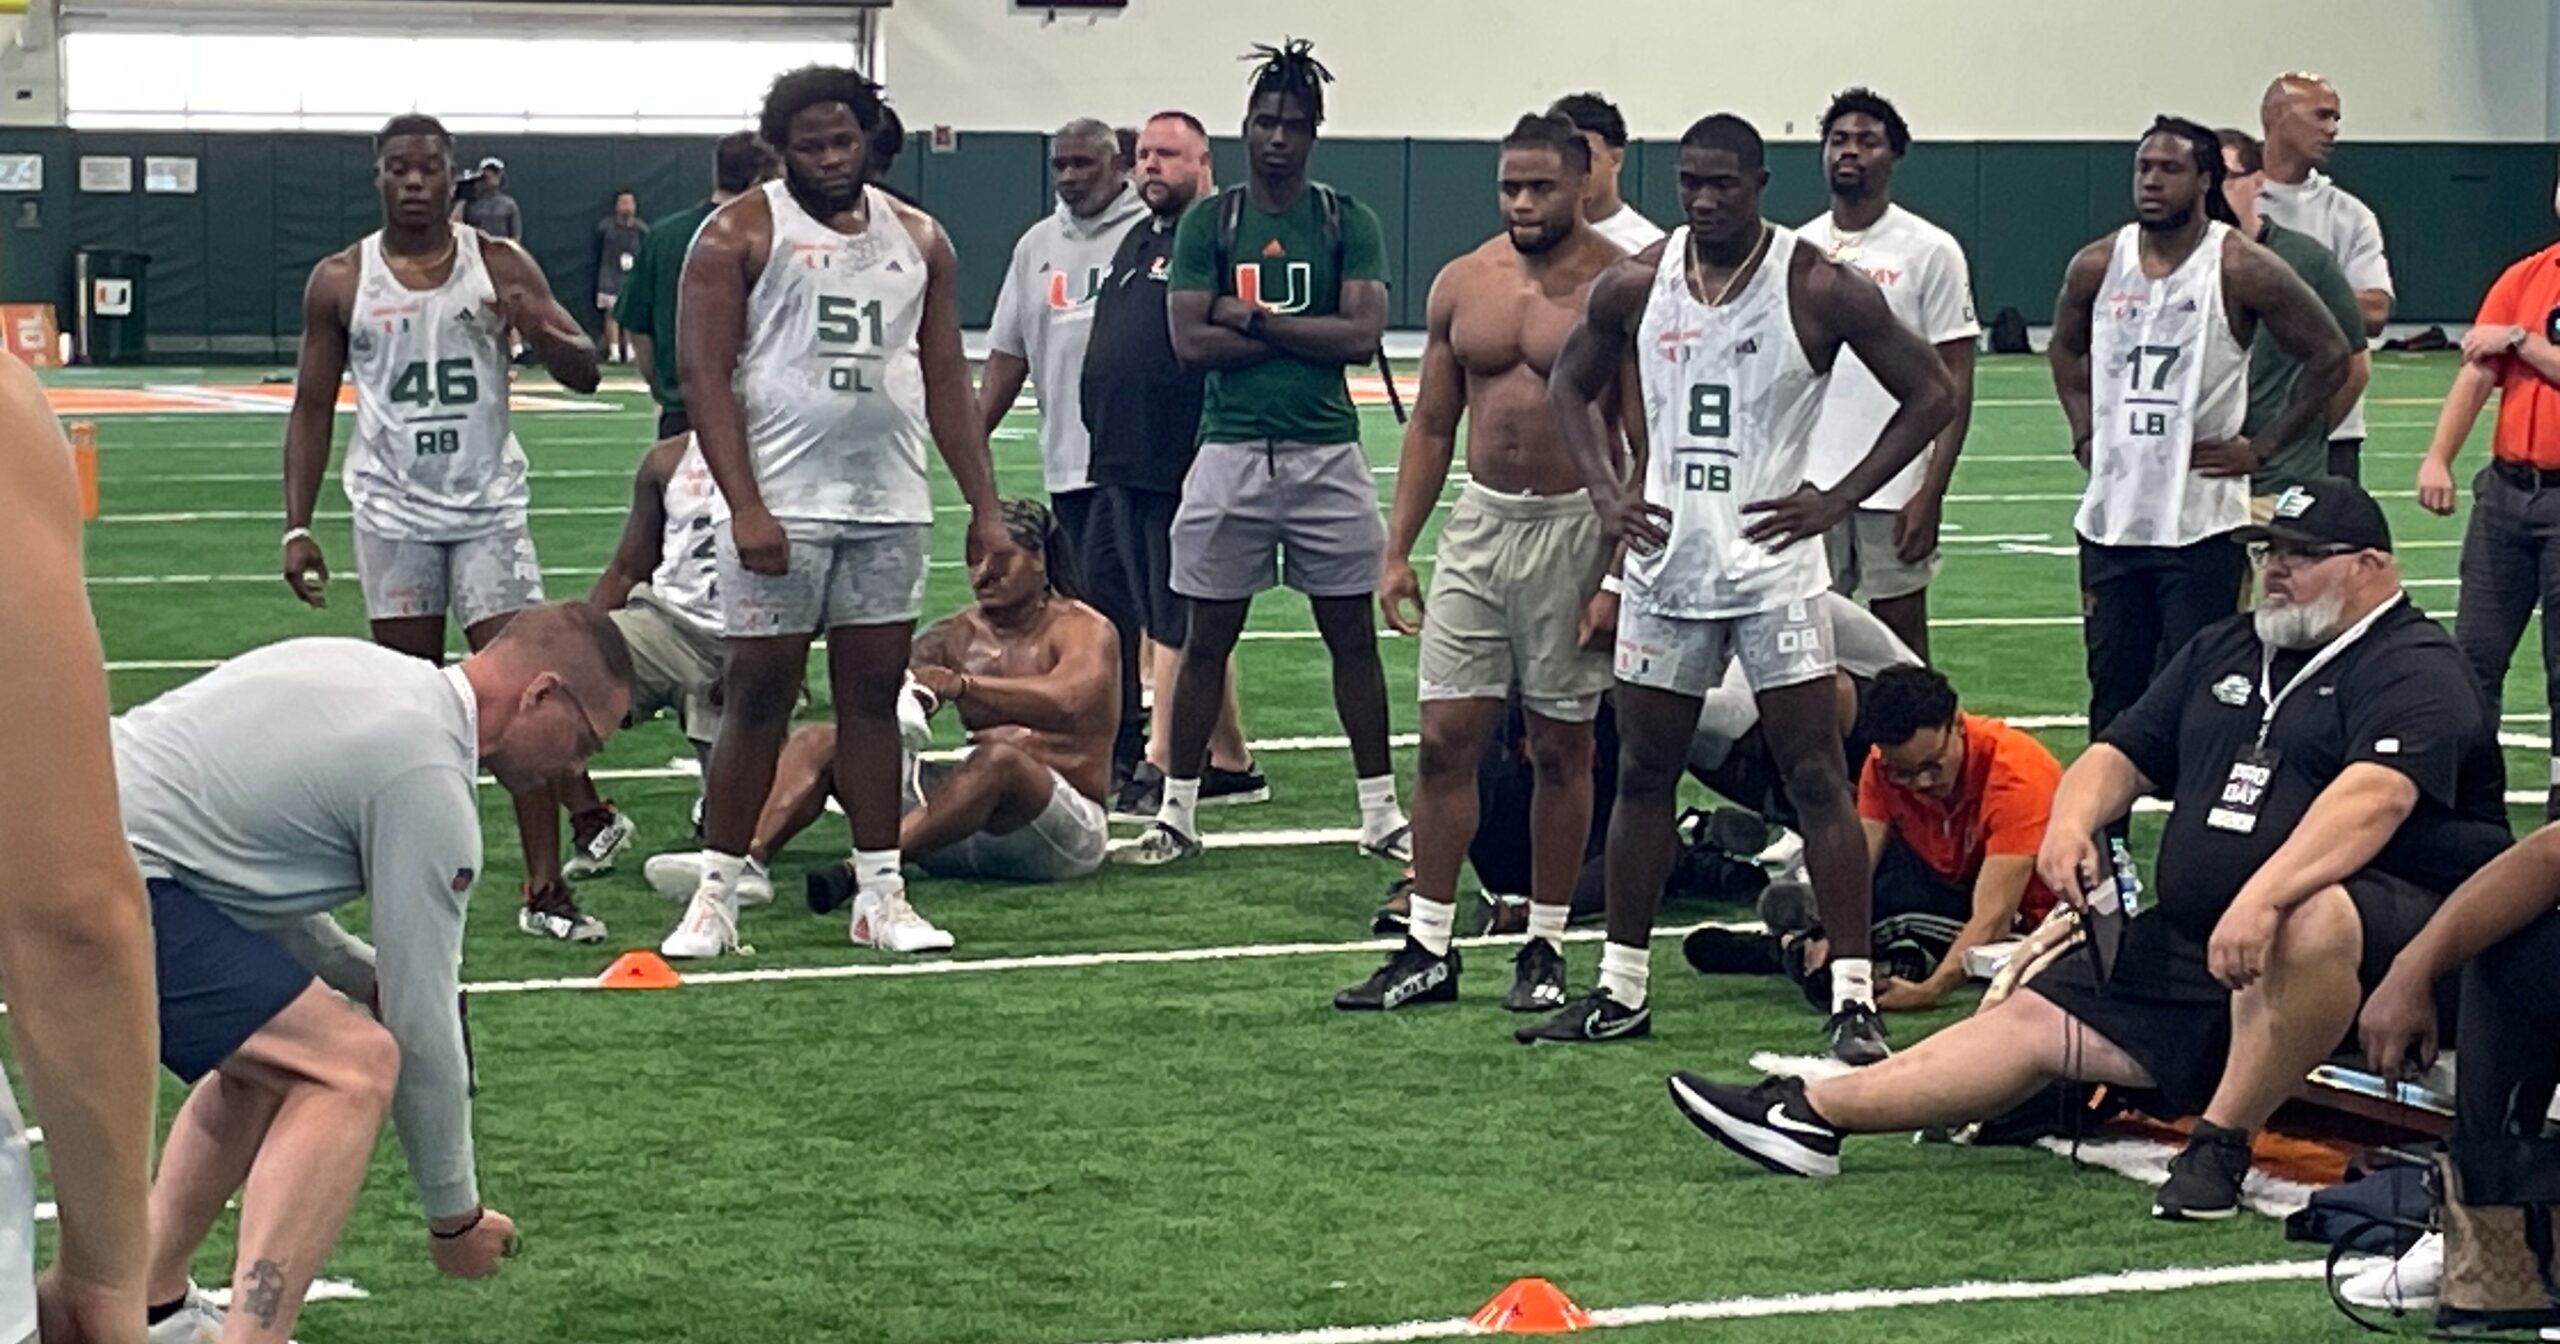 Miami Pro Day Hurricanes work out to impress NFL scouts